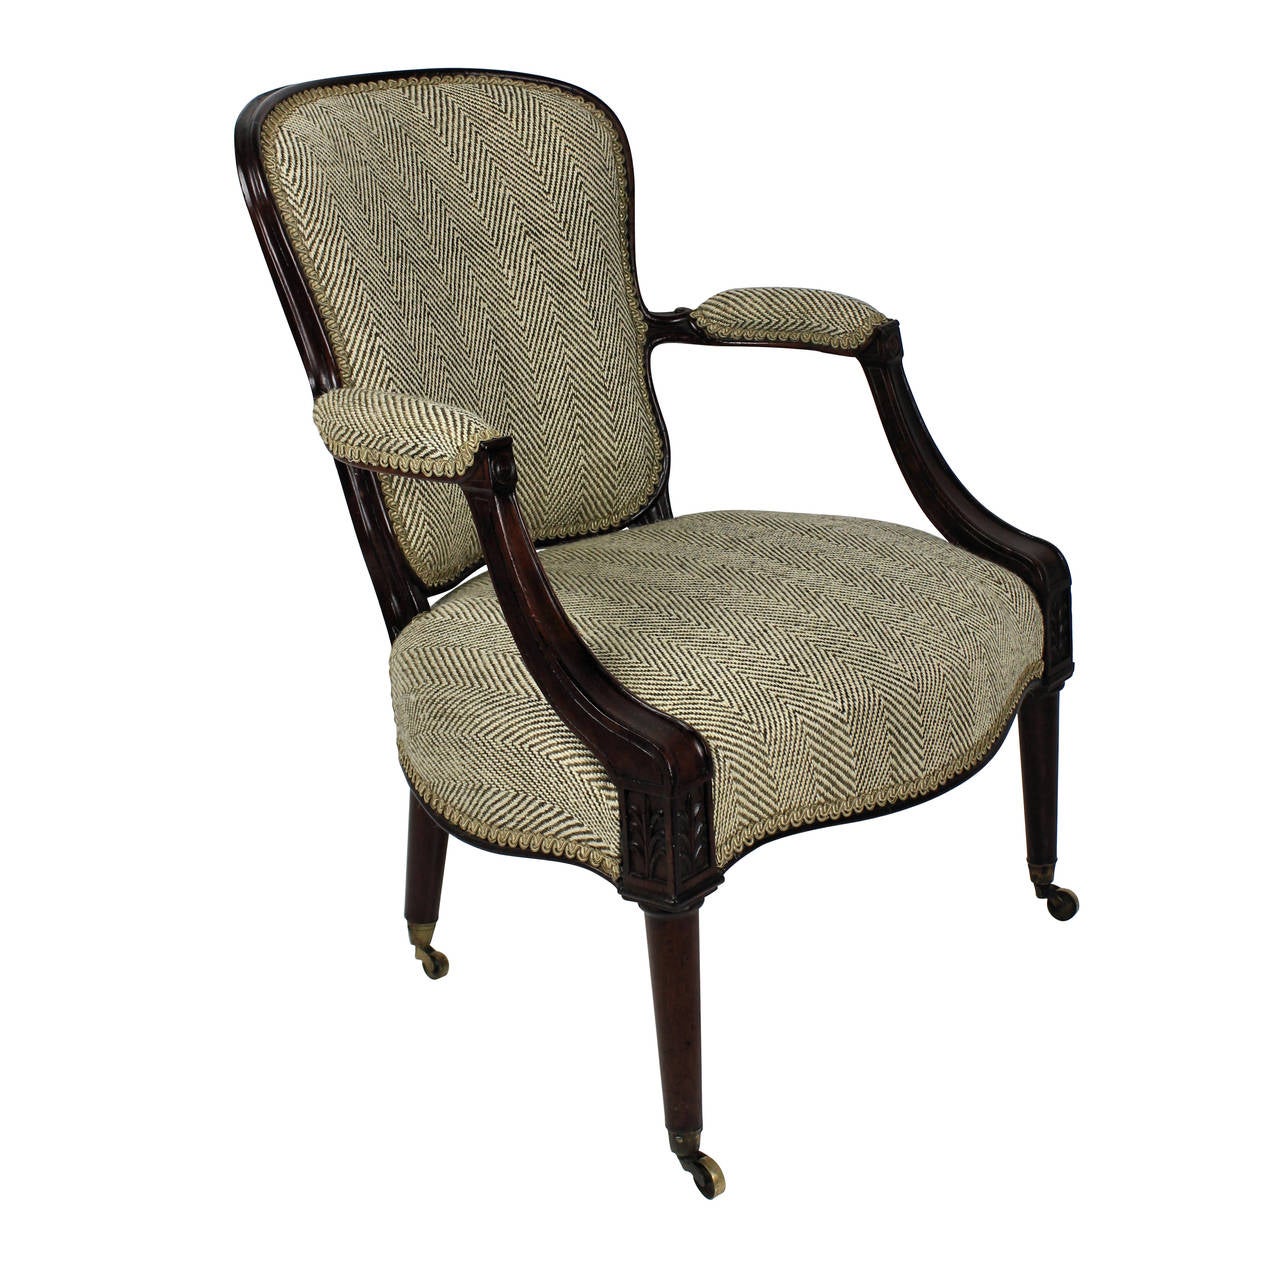 An English mahogany Hepplewhite armchair, with finely tapering back rail and arms with acanthus decoration. With horsehair upholstery and on brass casters.